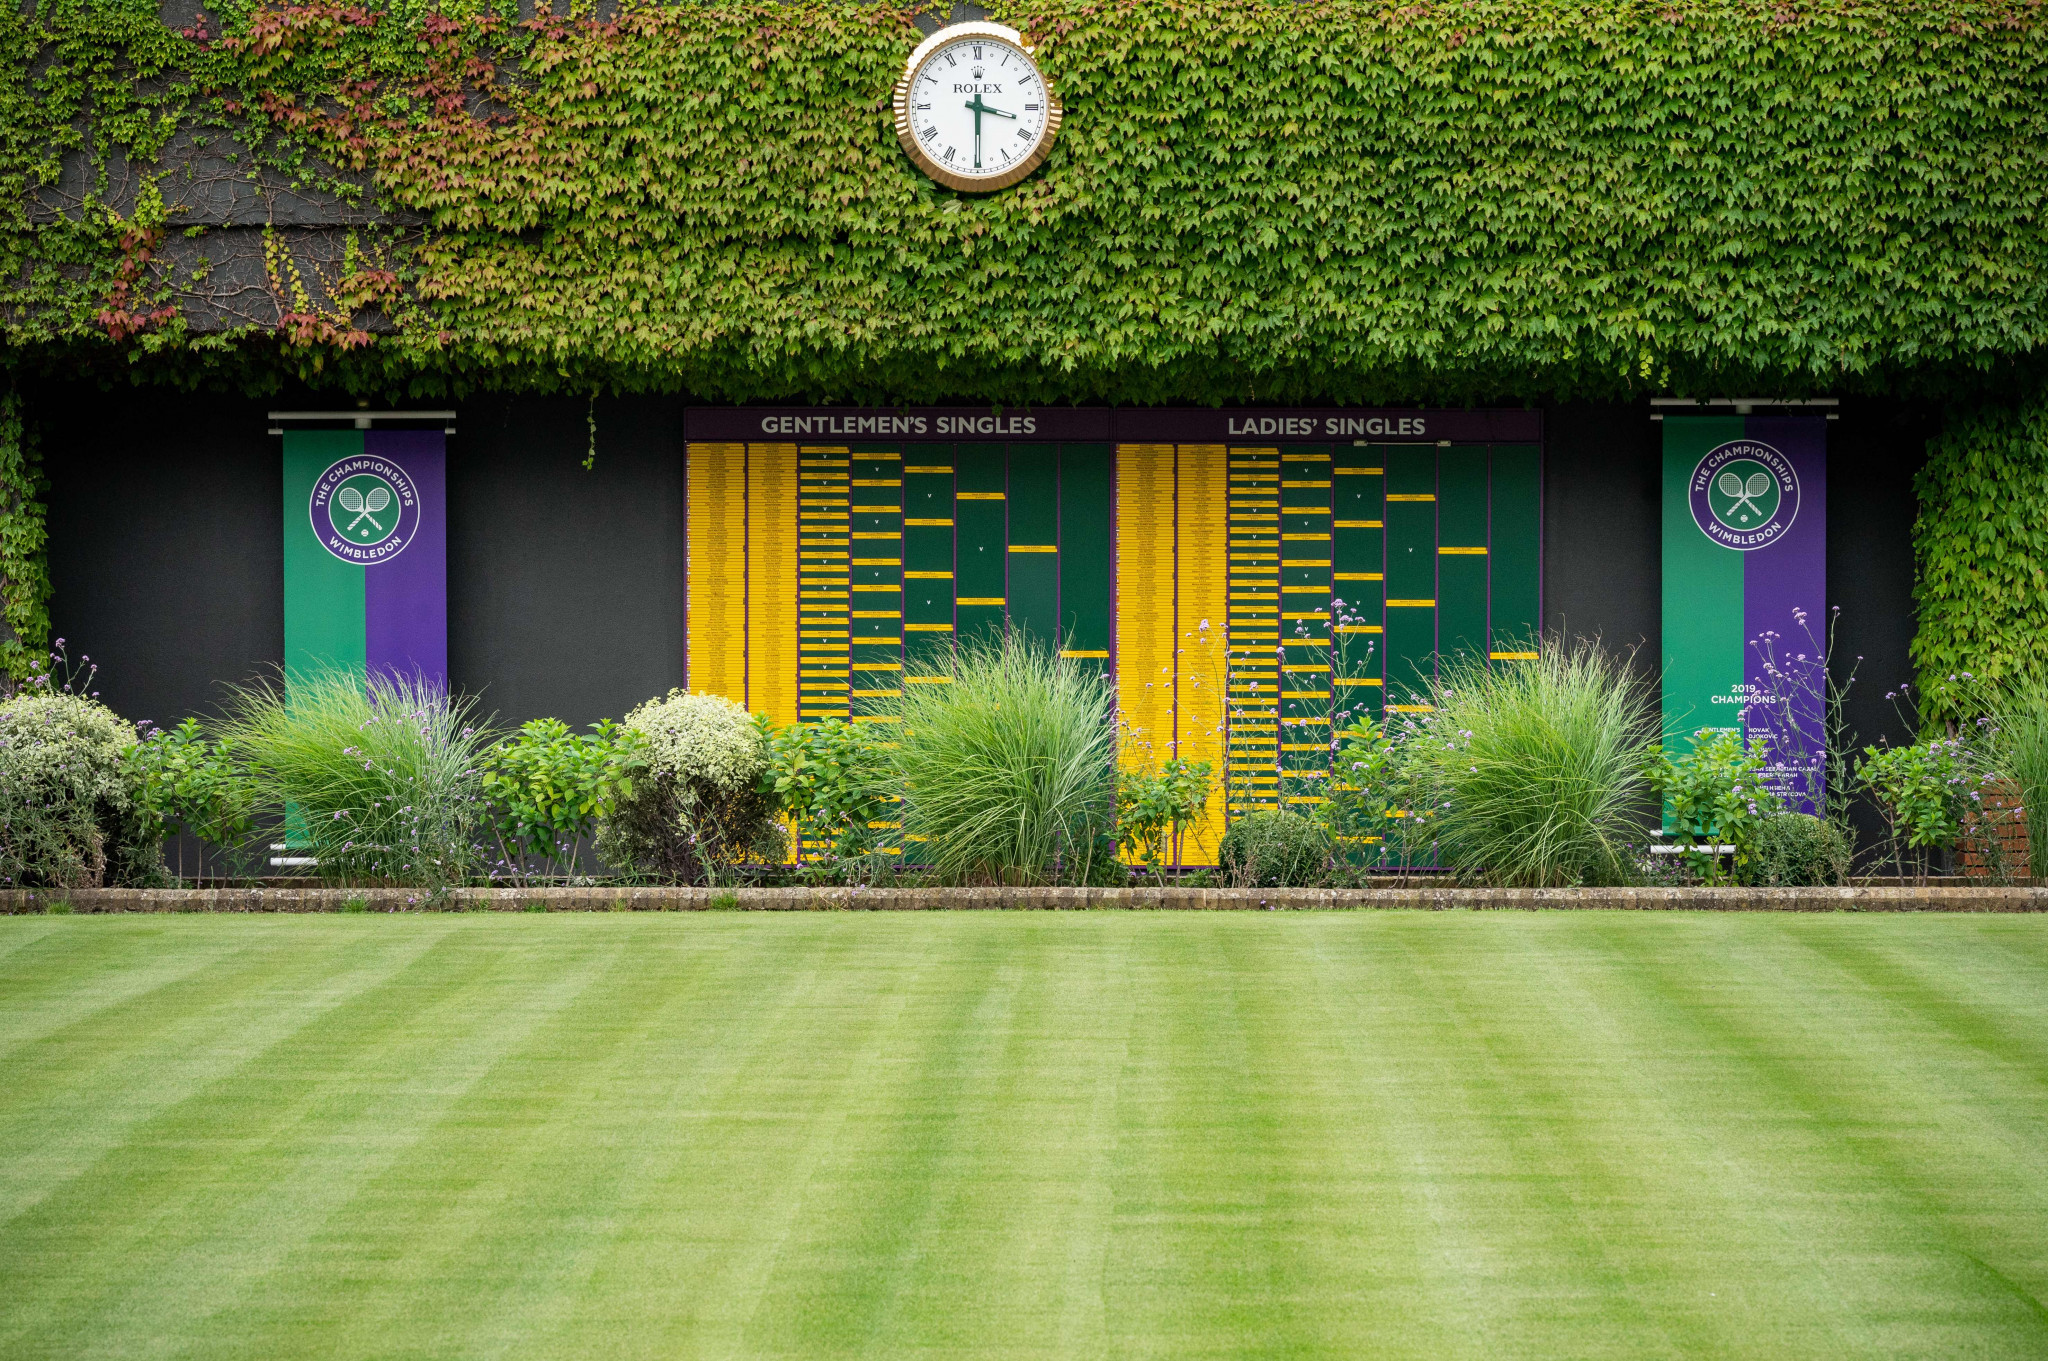 The AELTC are expected to receive a large insurance payout after the cancellation of this year's Wimbledon ©Getty Images